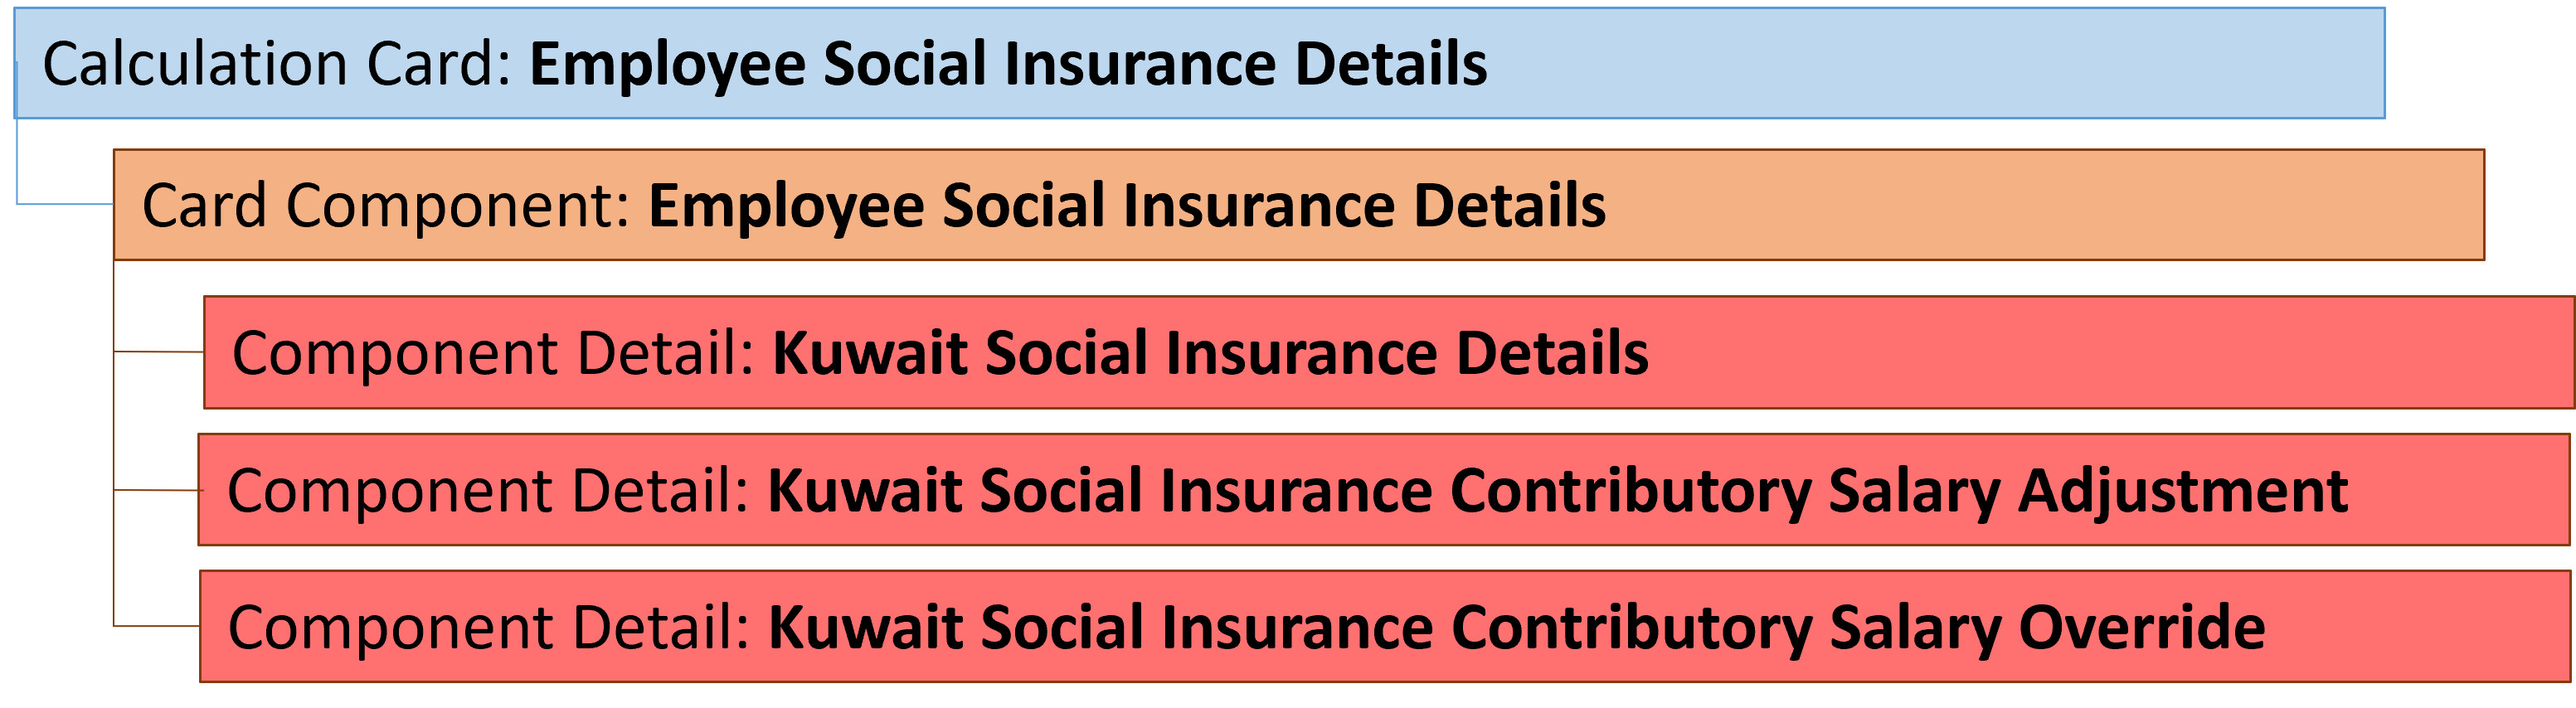 kw employee social insurance details card component